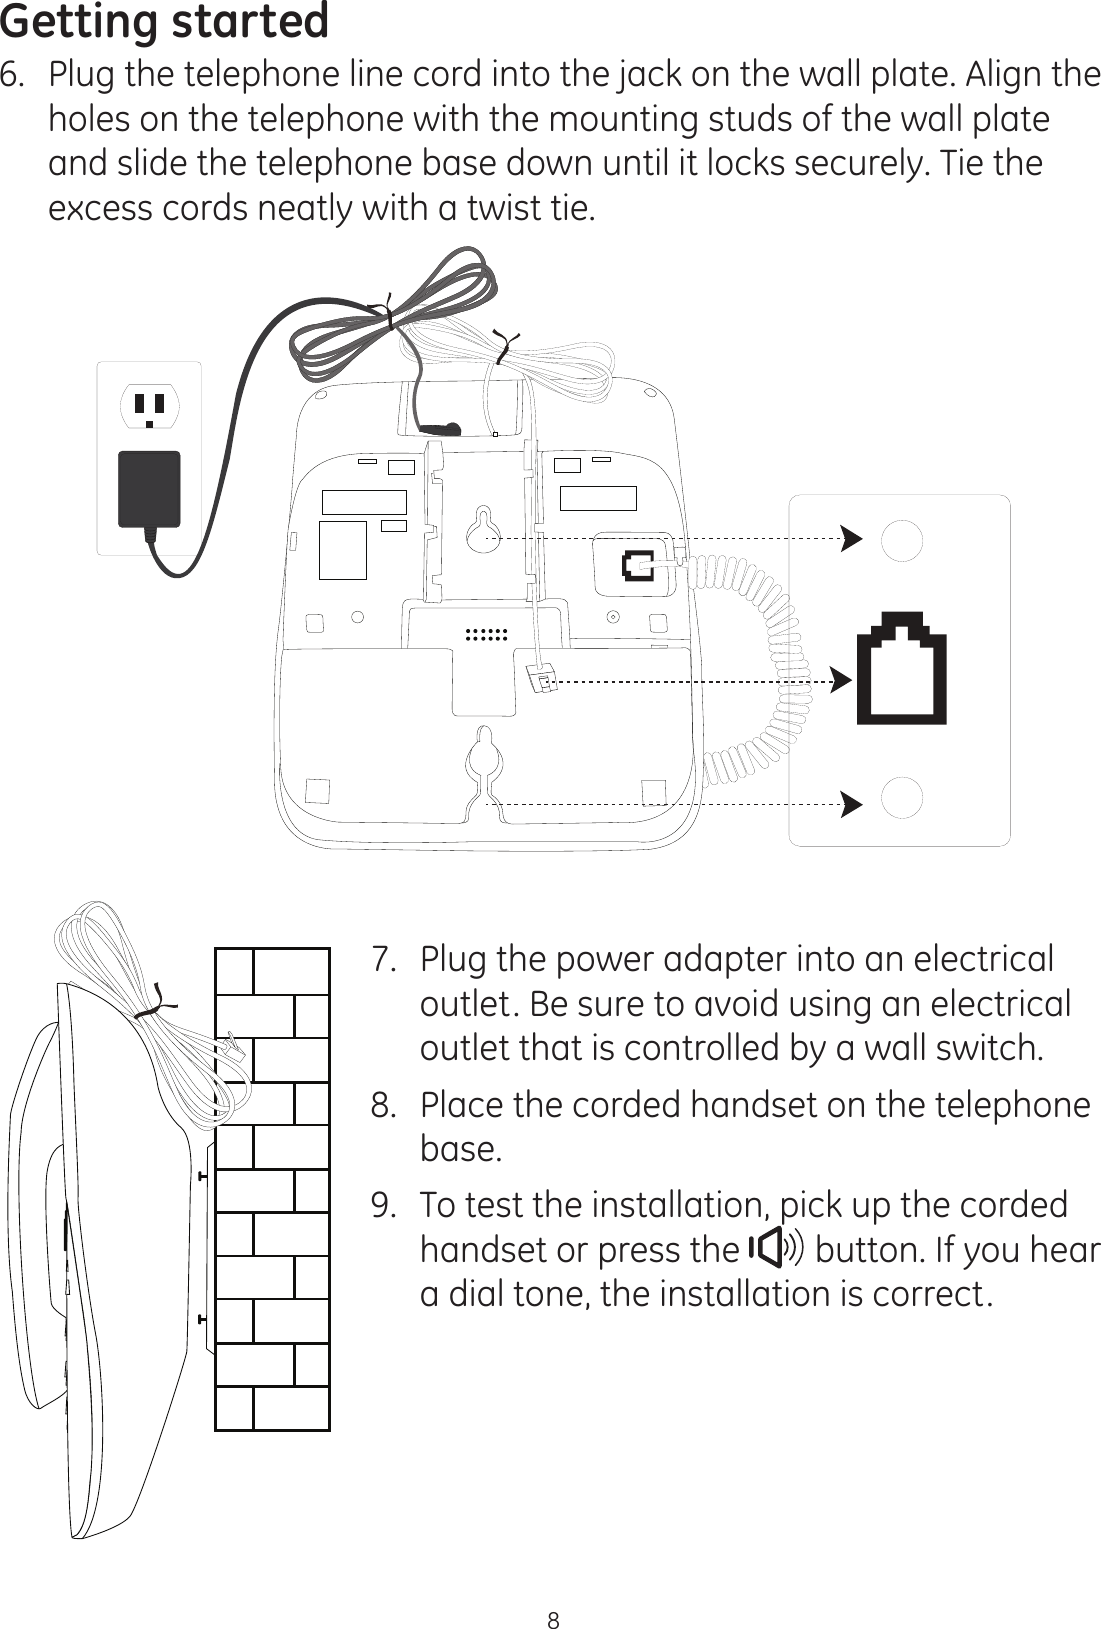 Getting started86.  Plug the telephone line cord into the jack on the wall plate. Align the holes on the telephone with the mounting studs of the wall plate and slide the telephone base down until it locks securely. Tie the excess cords neatly with a twist tie. 7.  Plug the power adapter into an electrical outlet. Be sure to avoid using an electrical outlet that is controlled by a wall switch. 8.   Place the corded handset on the telephone base.9.  To test the installation, pick up the corded handset or press the   button. If you hear a dial tone, the installation is correct.